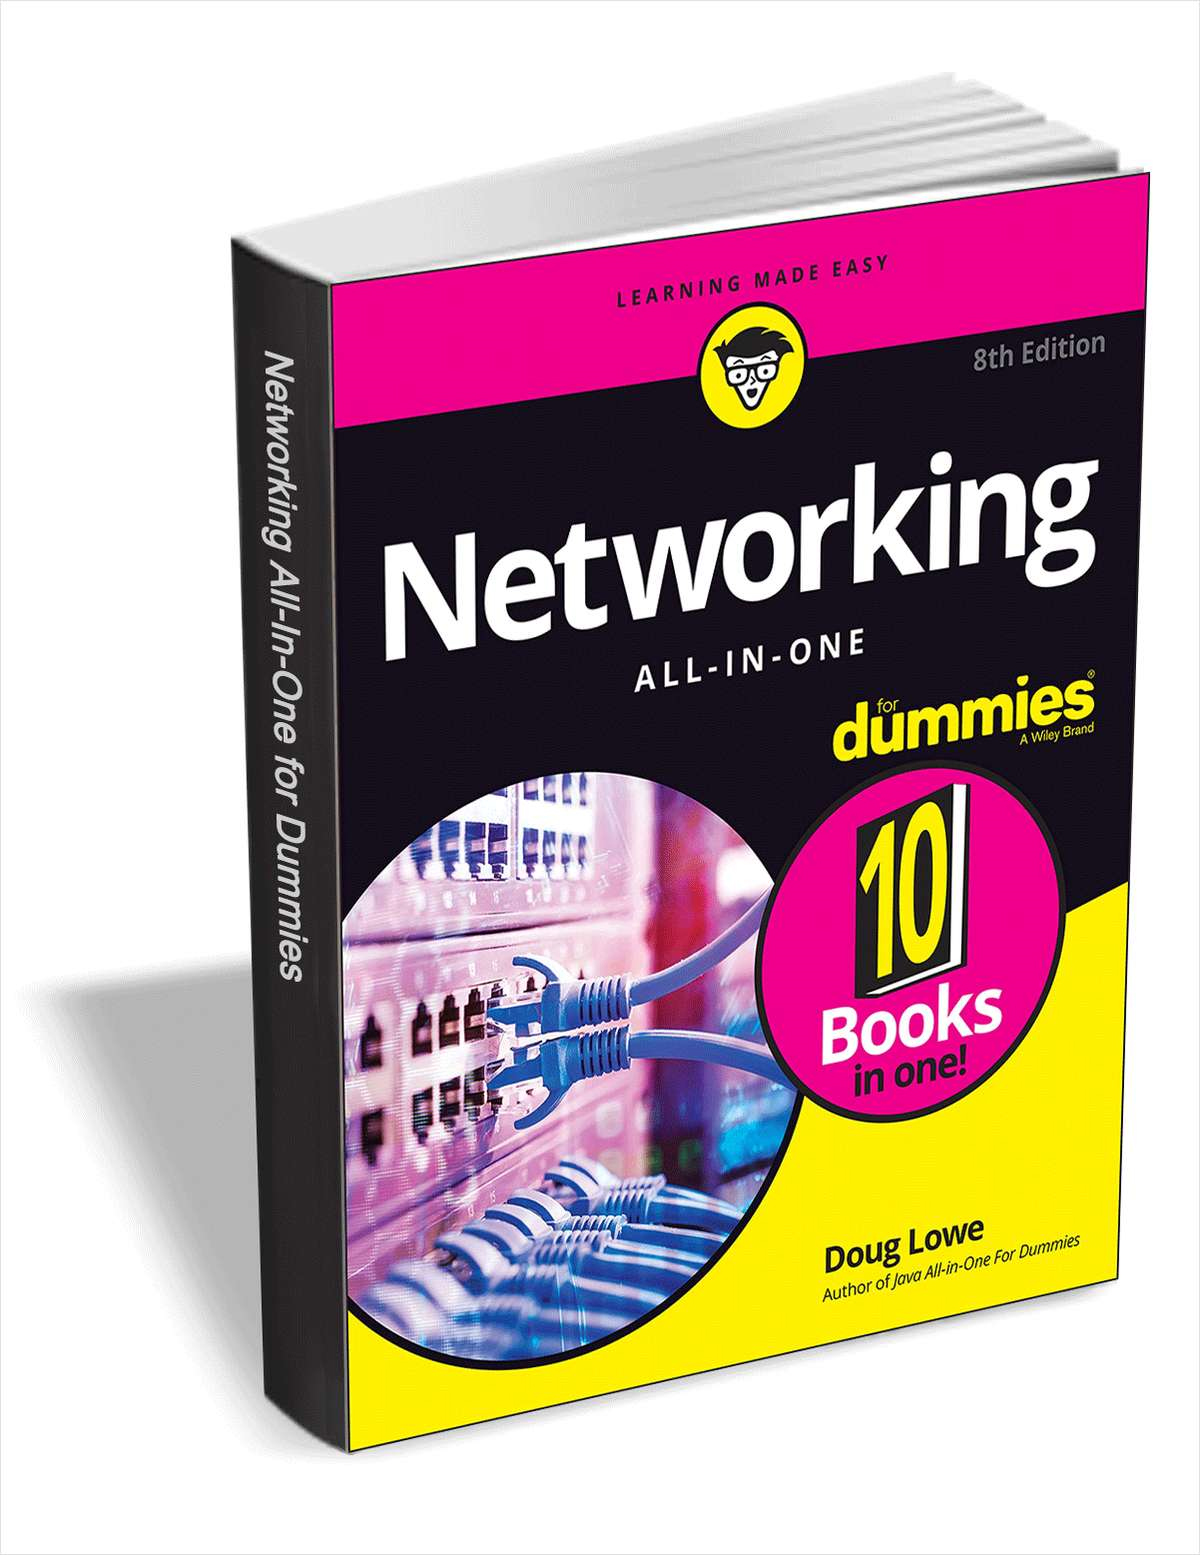 Networking All-in-One For Dummies, 8th Edition ($30.00 Value) FREE for a Limited Time Screenshot